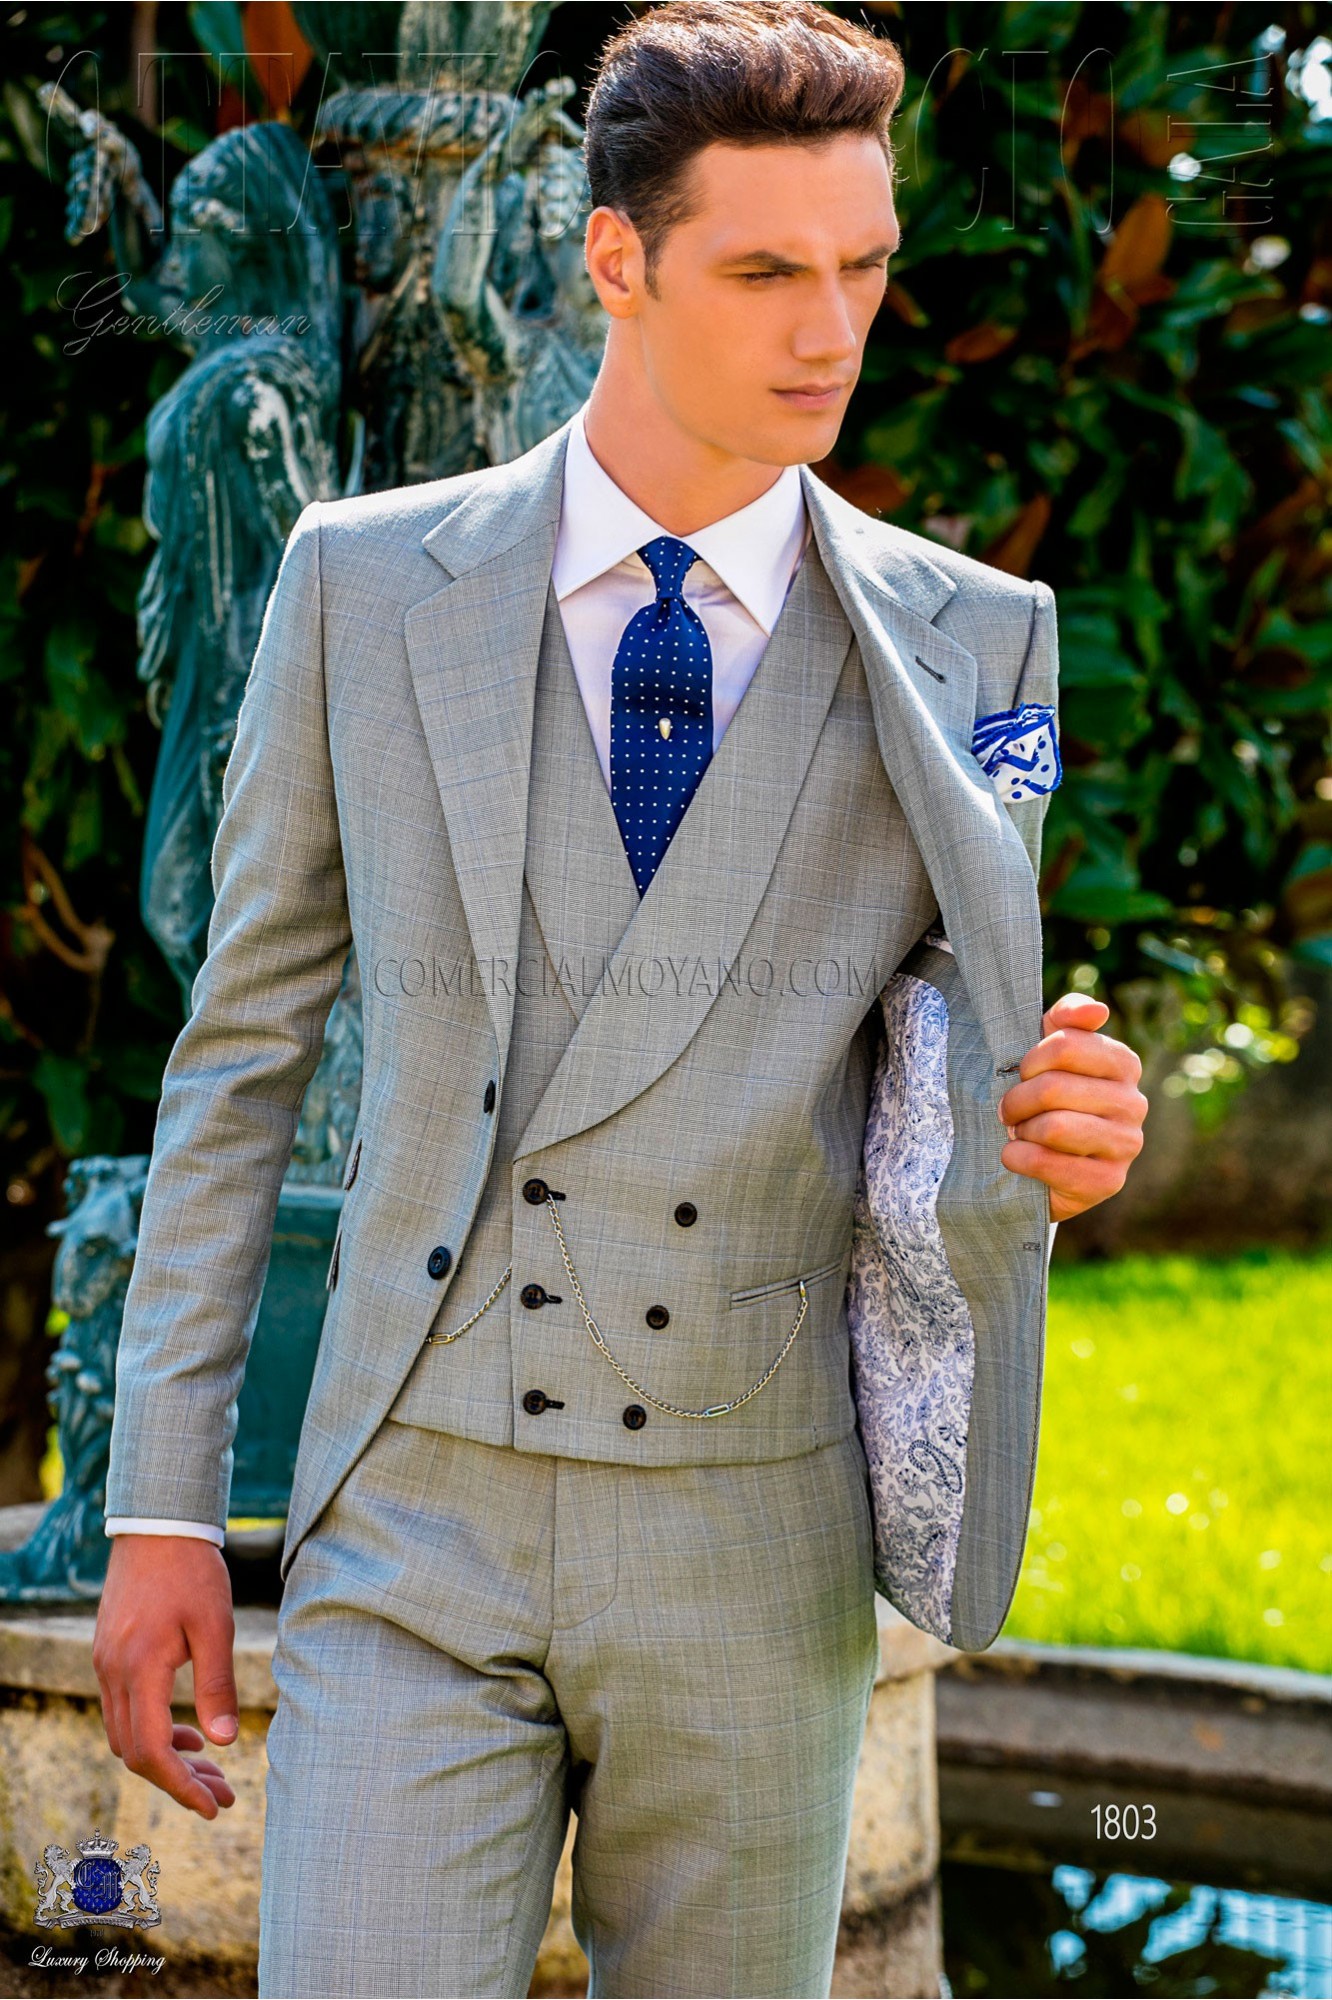 Bespoke Prince of Wales light grey and blue suit model 1803 Mario Moyano